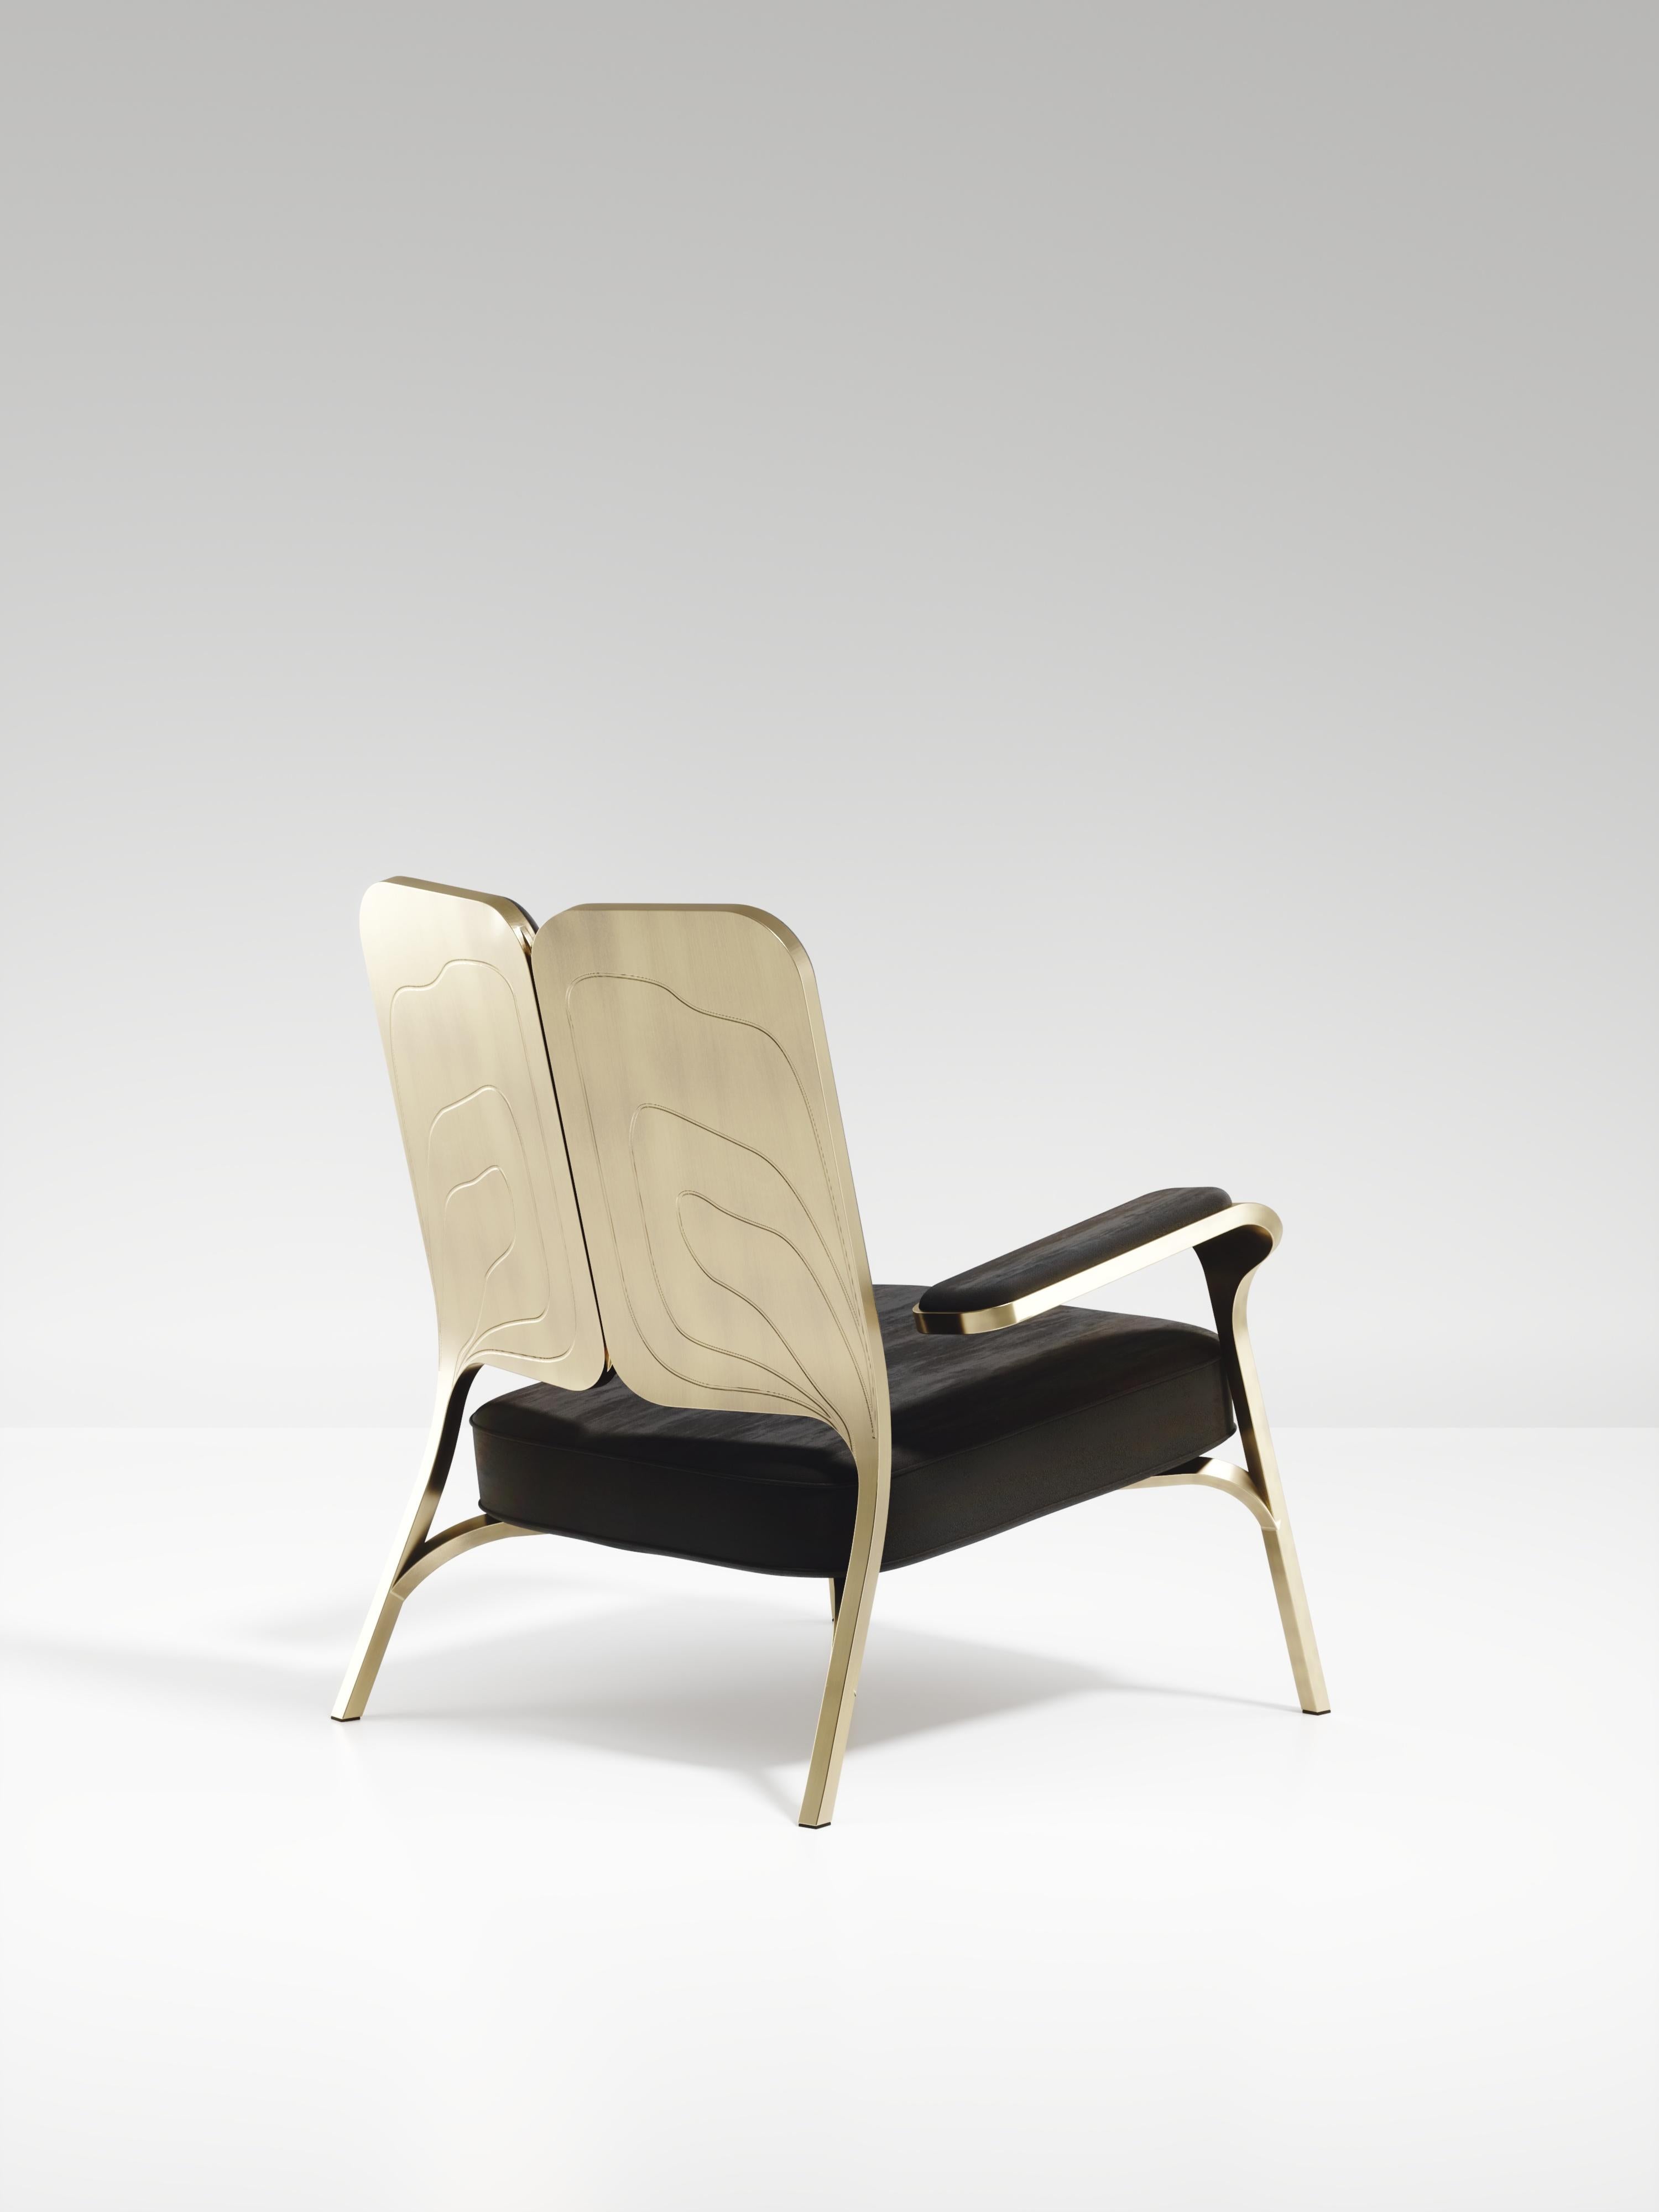 The Gingko armchair by R & Y Augousti is an elegant and whimsical piece. The black velvet upholstered piece provides comfort while exuding a playful aesthetic in its abstract nod to a butterfly with the form of its backrest and intricate engraving